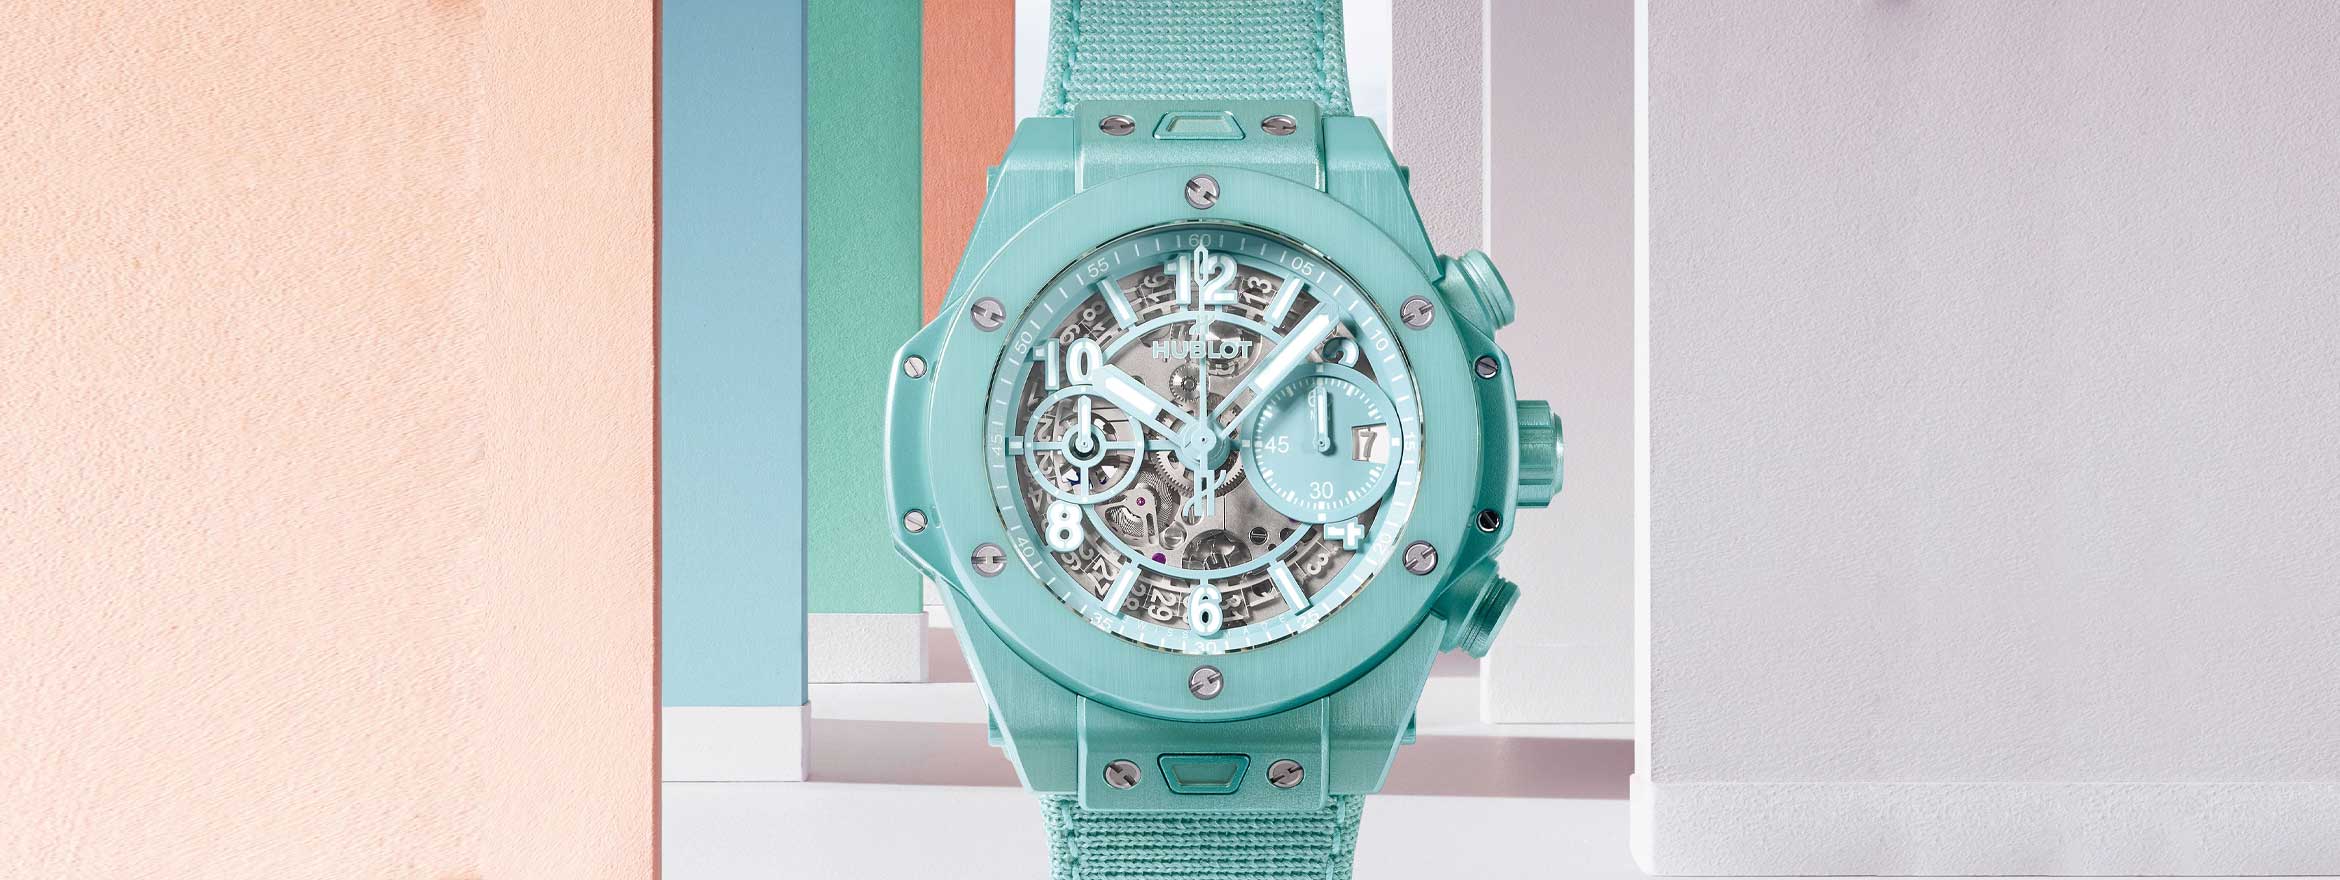 The Perfect Hublot Eye Candy this Summer